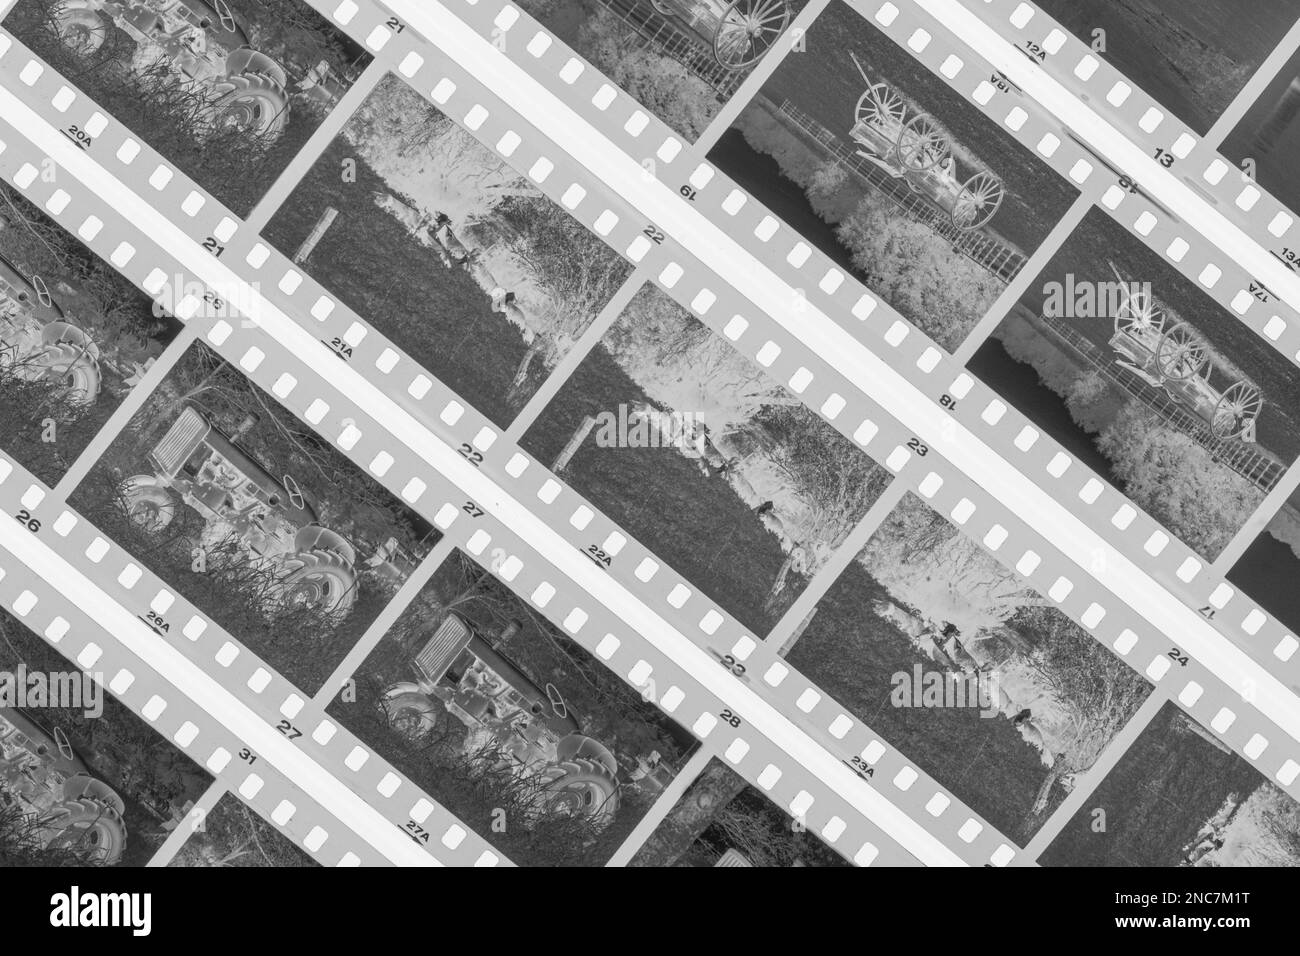 Film photography is making a comback, and this photograph is a close-up of 35mm black and white negatives on a light table. The photos belong to the p Stock Photo